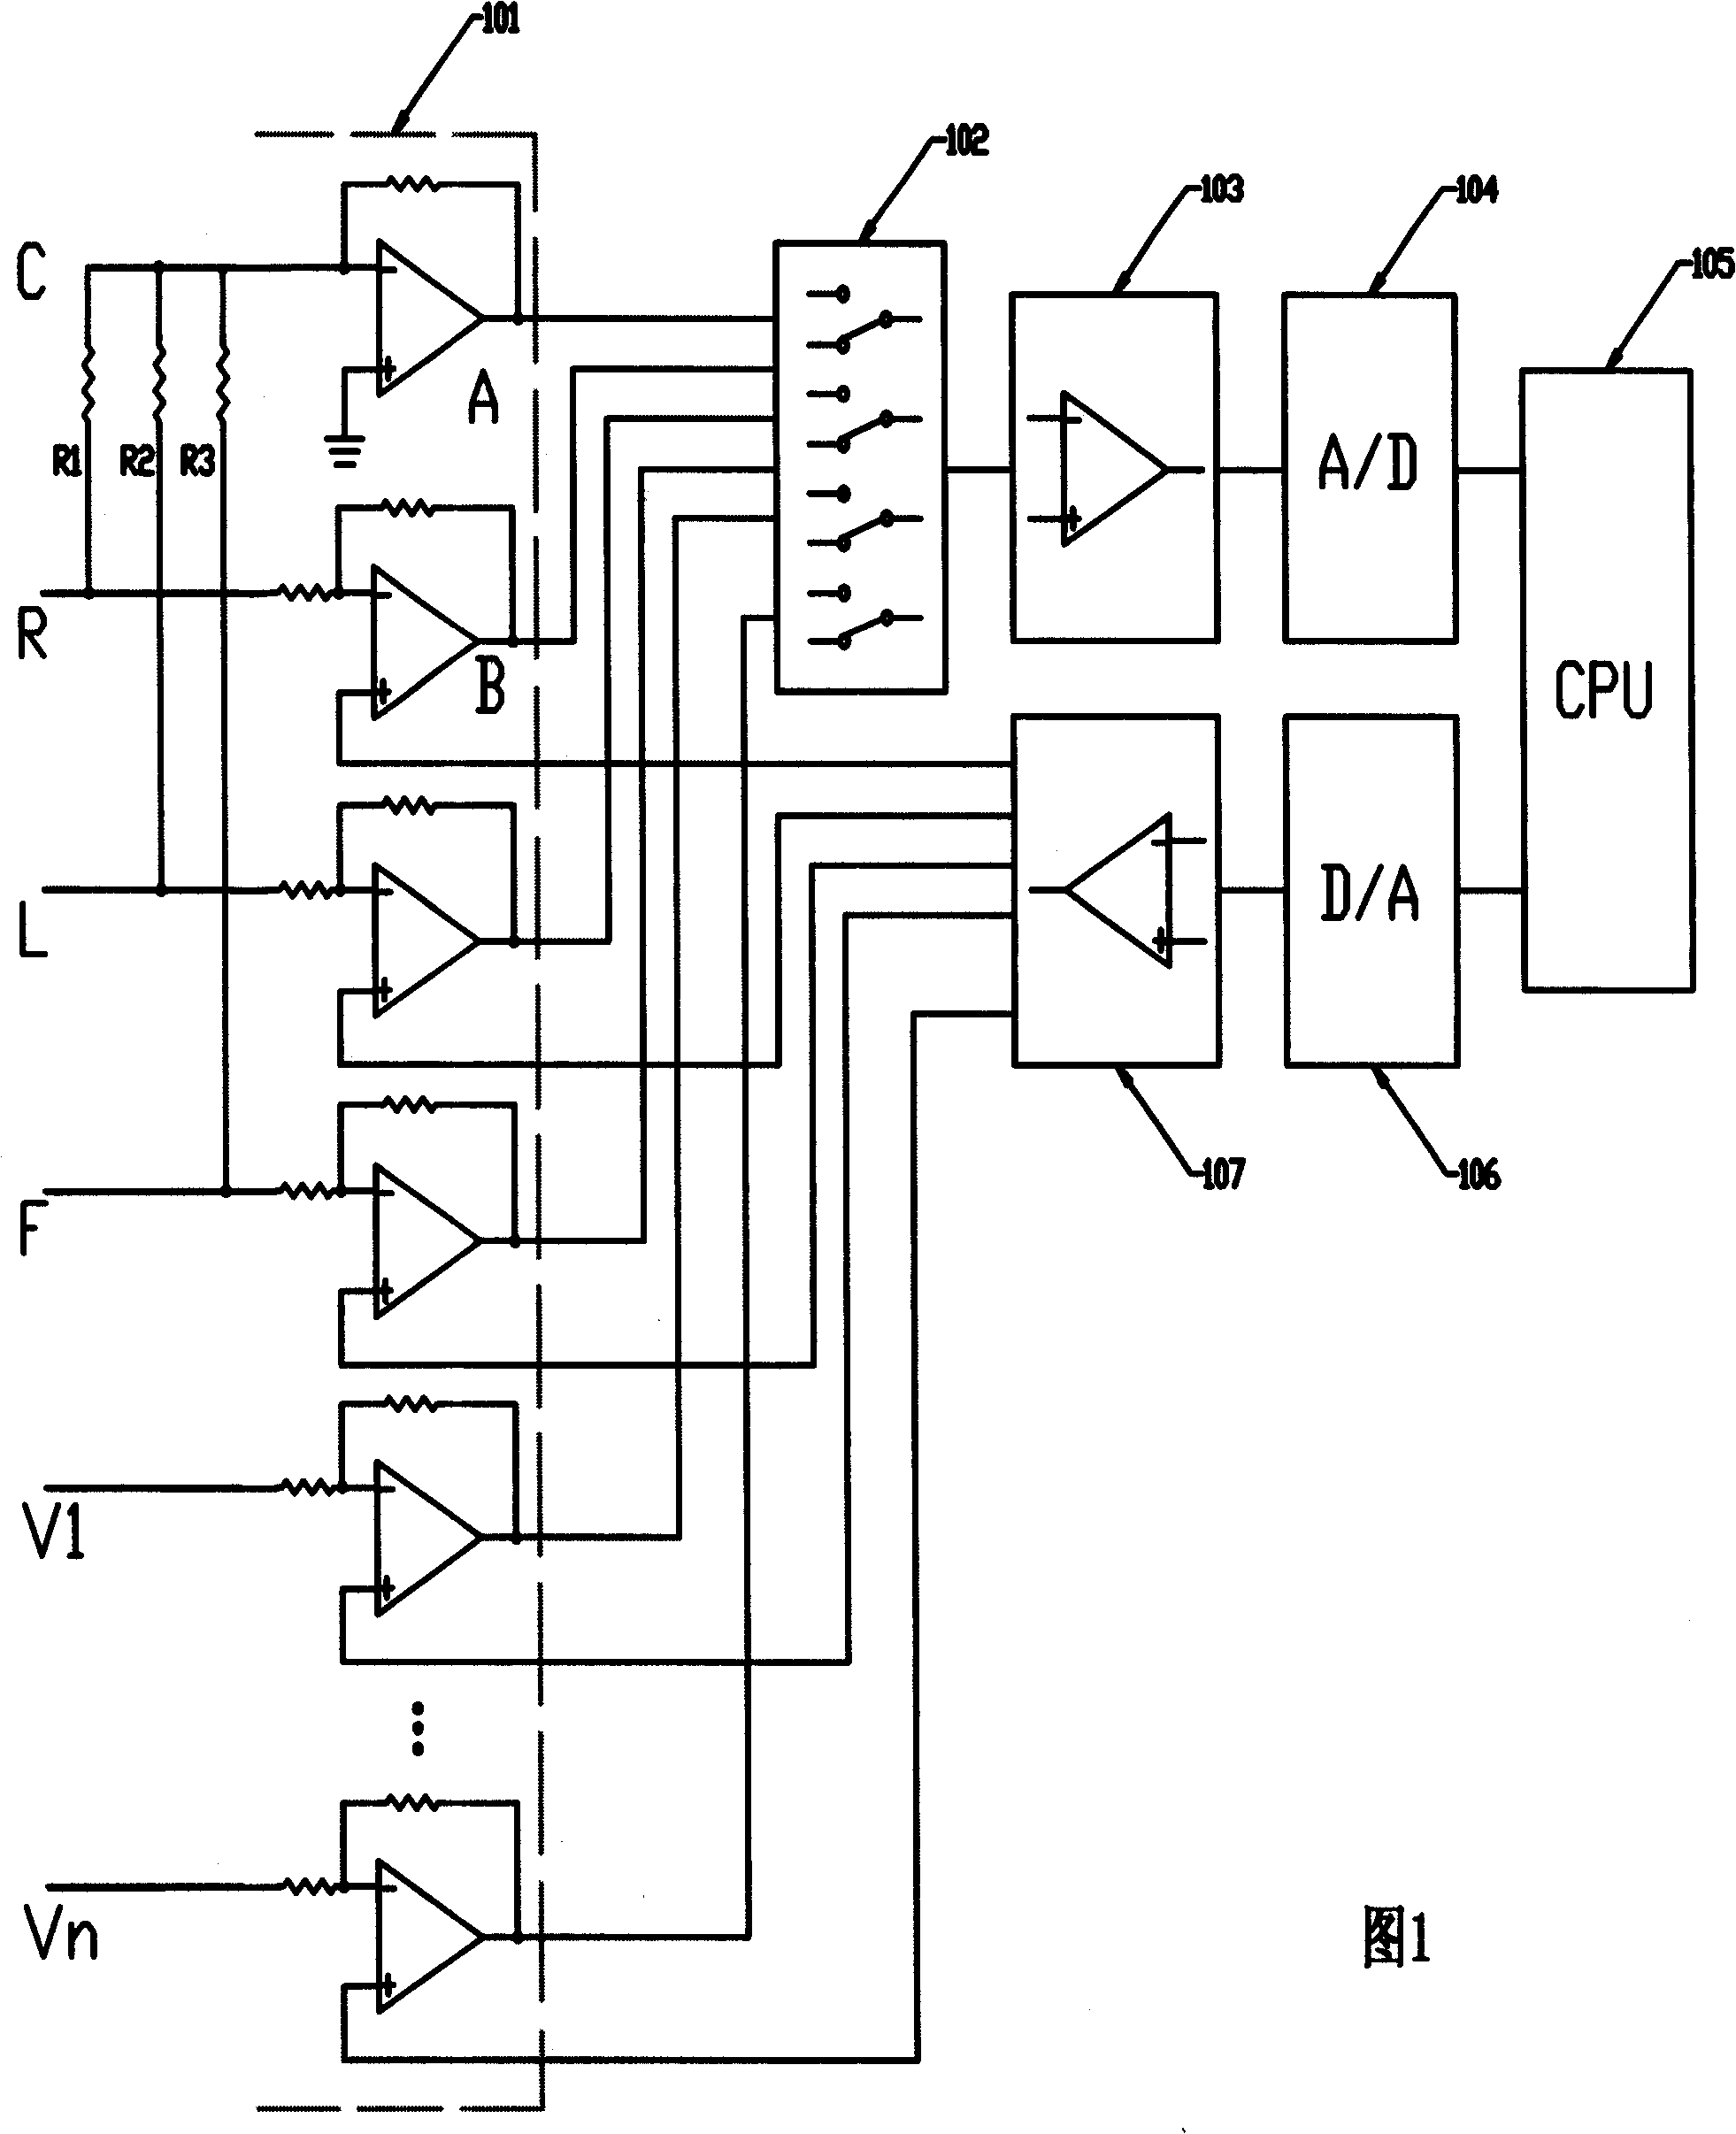 Cardiac electricity detecting system using embedded right leg drive